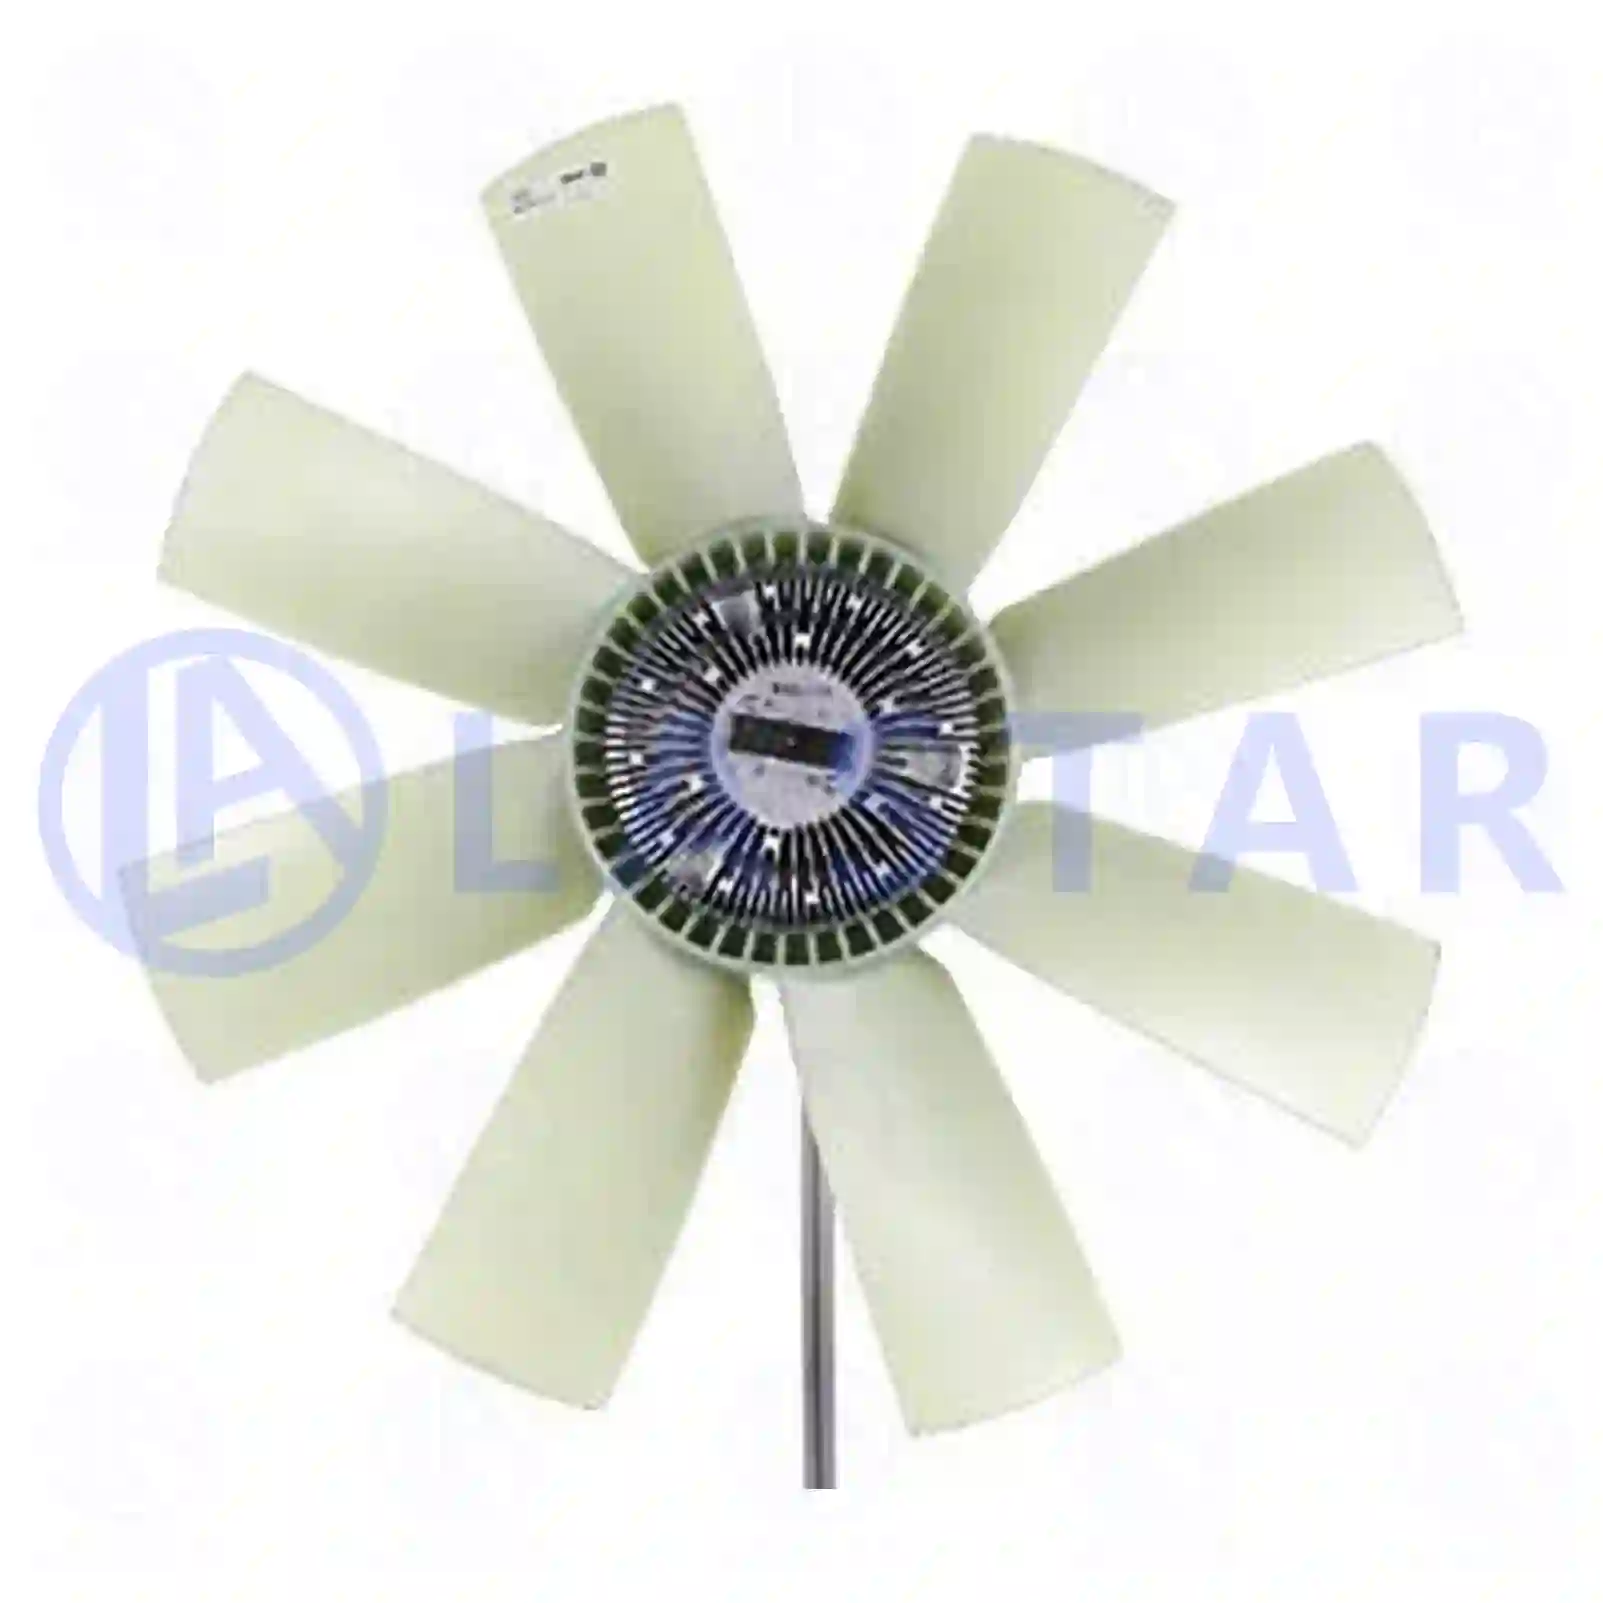 Fan with clutch, 77709416, 20397619, 8500002 ||  77709416 Lastar Spare Part | Truck Spare Parts, Auotomotive Spare Parts Fan with clutch, 77709416, 20397619, 8500002 ||  77709416 Lastar Spare Part | Truck Spare Parts, Auotomotive Spare Parts